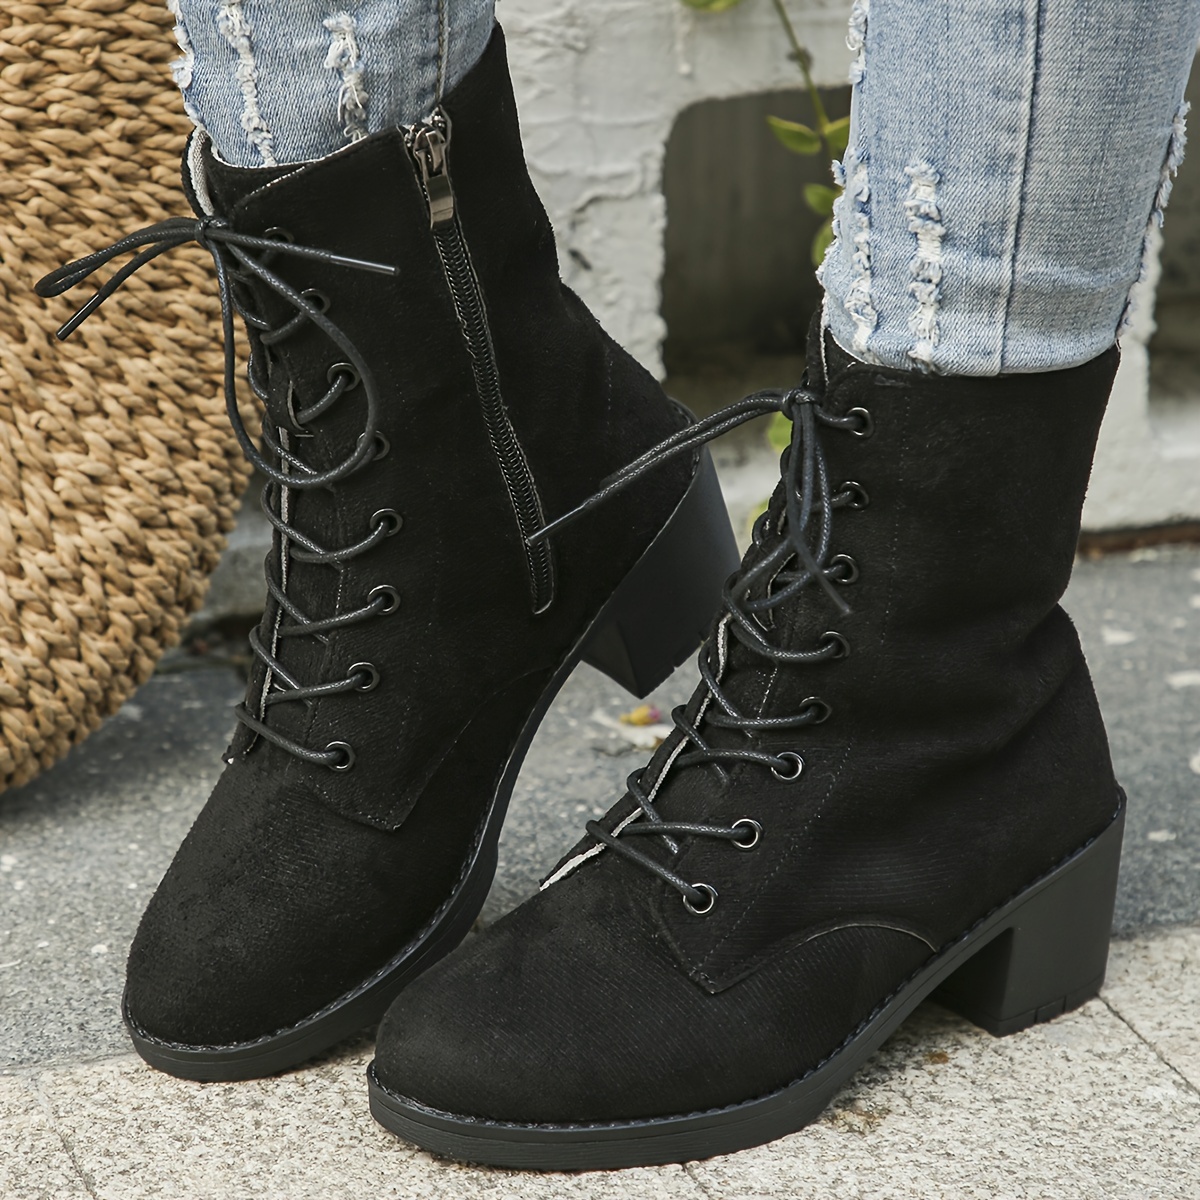 Women's Mid-Calf Boots with Rounded Toes and Decorative Laces - Dark Gray